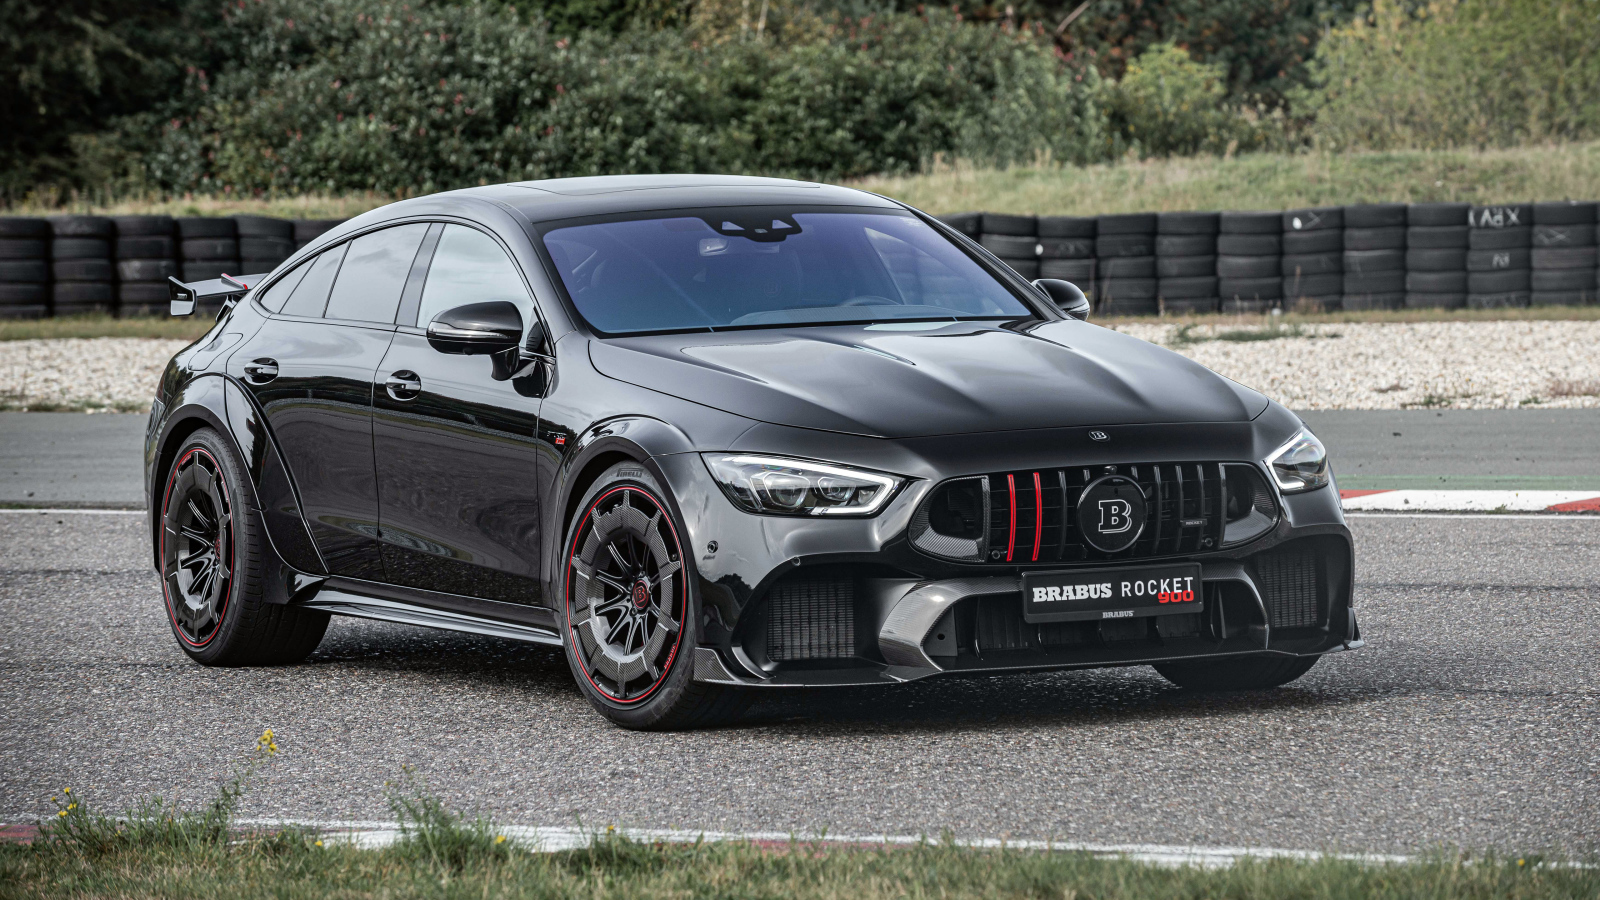 Black expensive car Brabus Rocket 900 One Of Ten Mercedes-AMG GT 63 S 4MATIC +